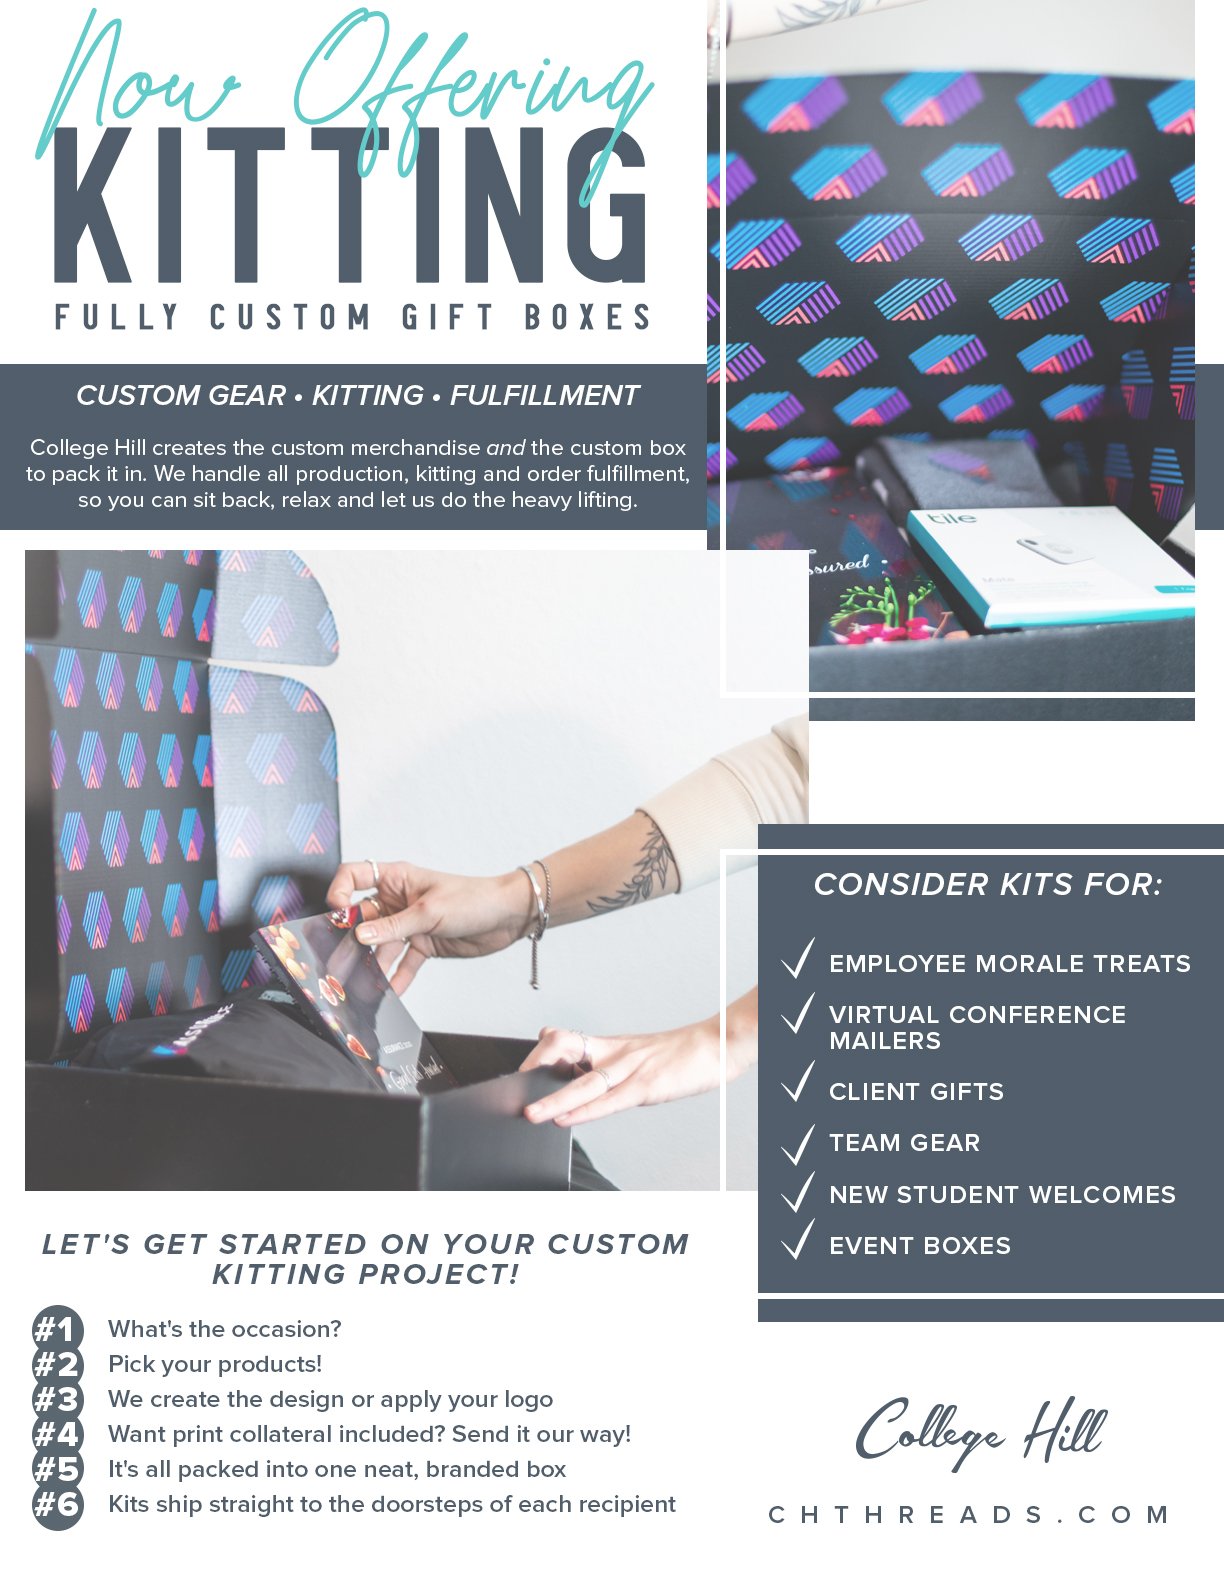 College Hill Kitting Service